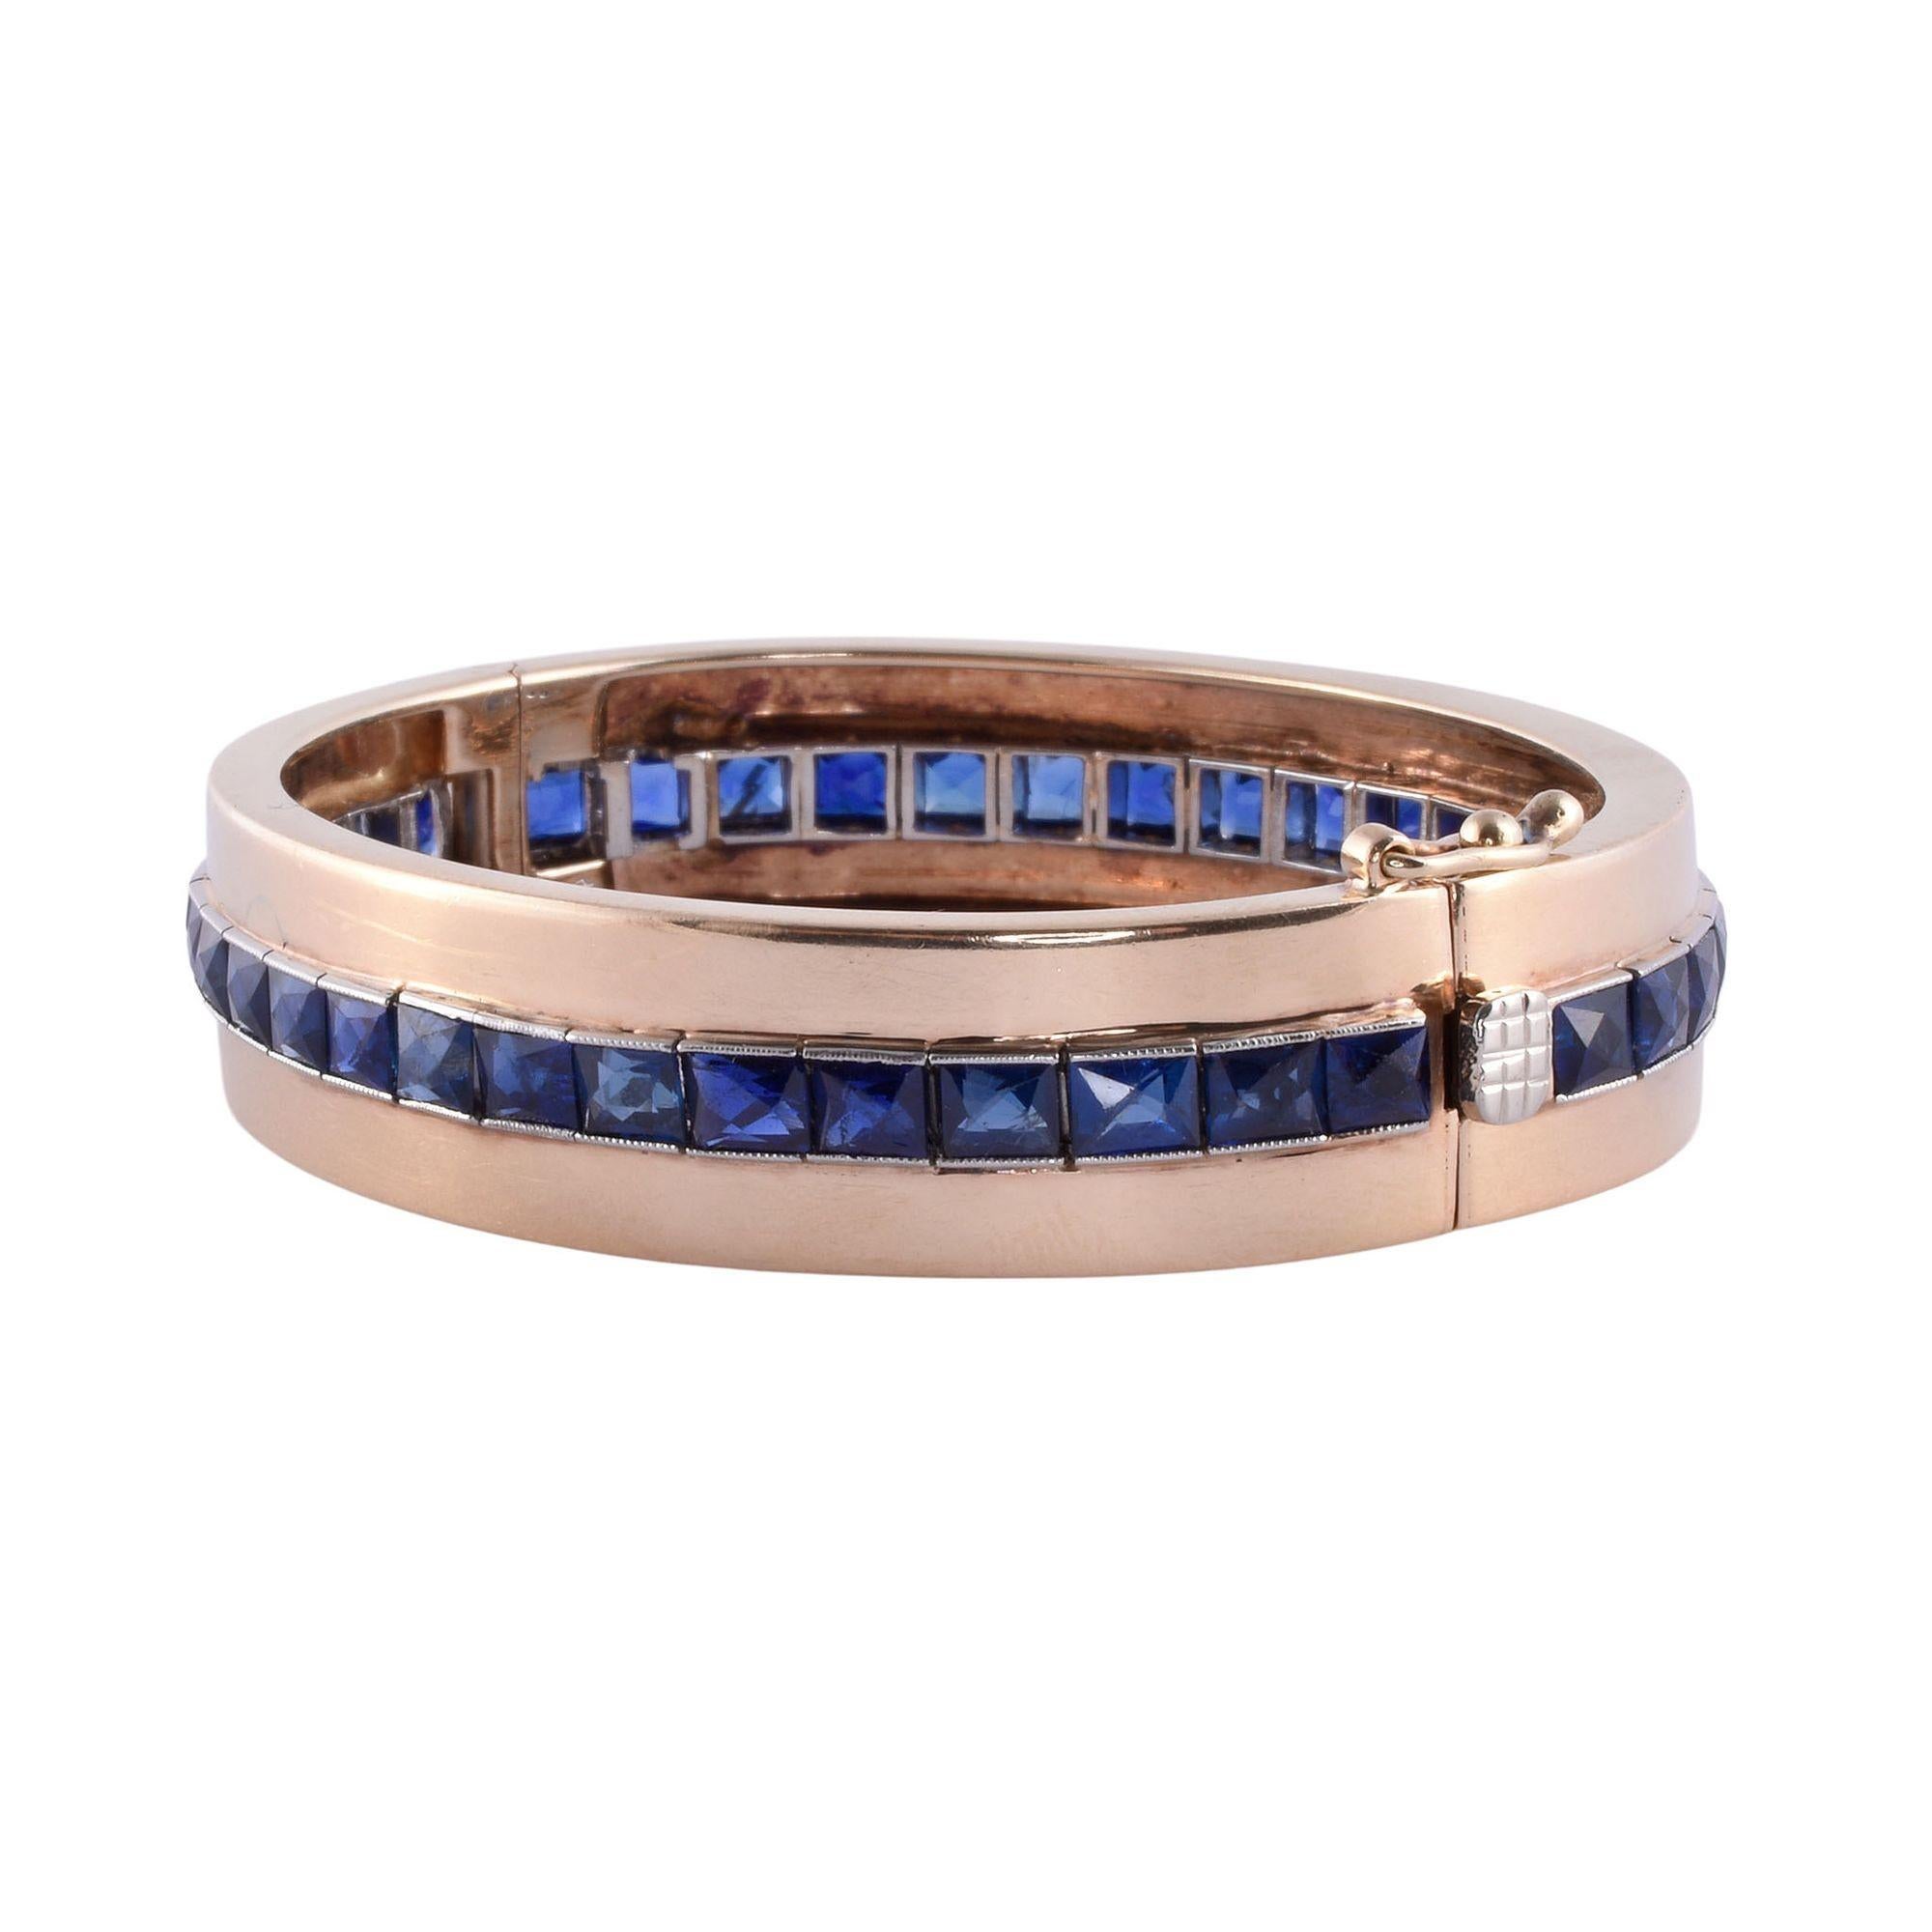 Vintage sapphire 14K & platinum hinged bangle bracelet, circa 1930. This custom made bracelet is crafted in 14 karat yellow gold and platinum bar set with 38 French cut sapphires at 13.25 carat total weight. These sapphires are eye clean and very